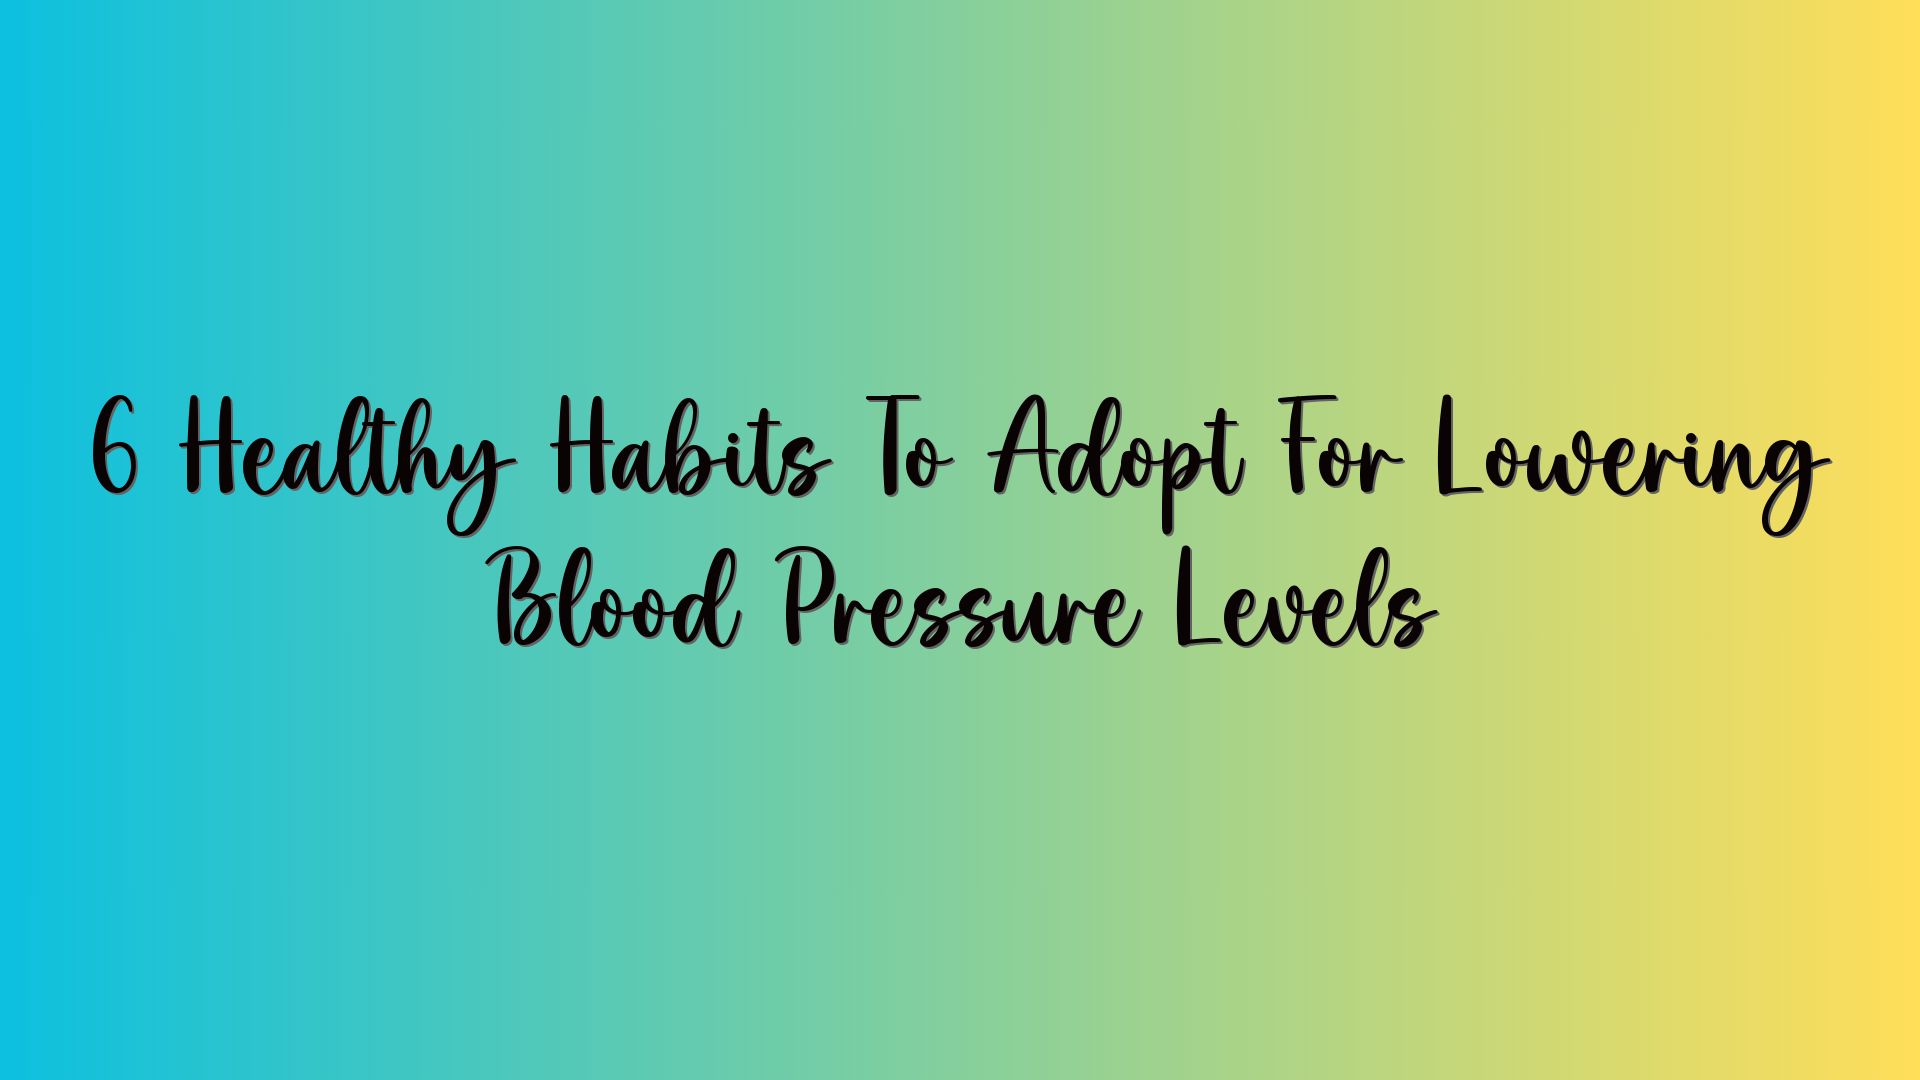 6 Healthy Habits To Adopt For Lowering Blood Pressure Levels